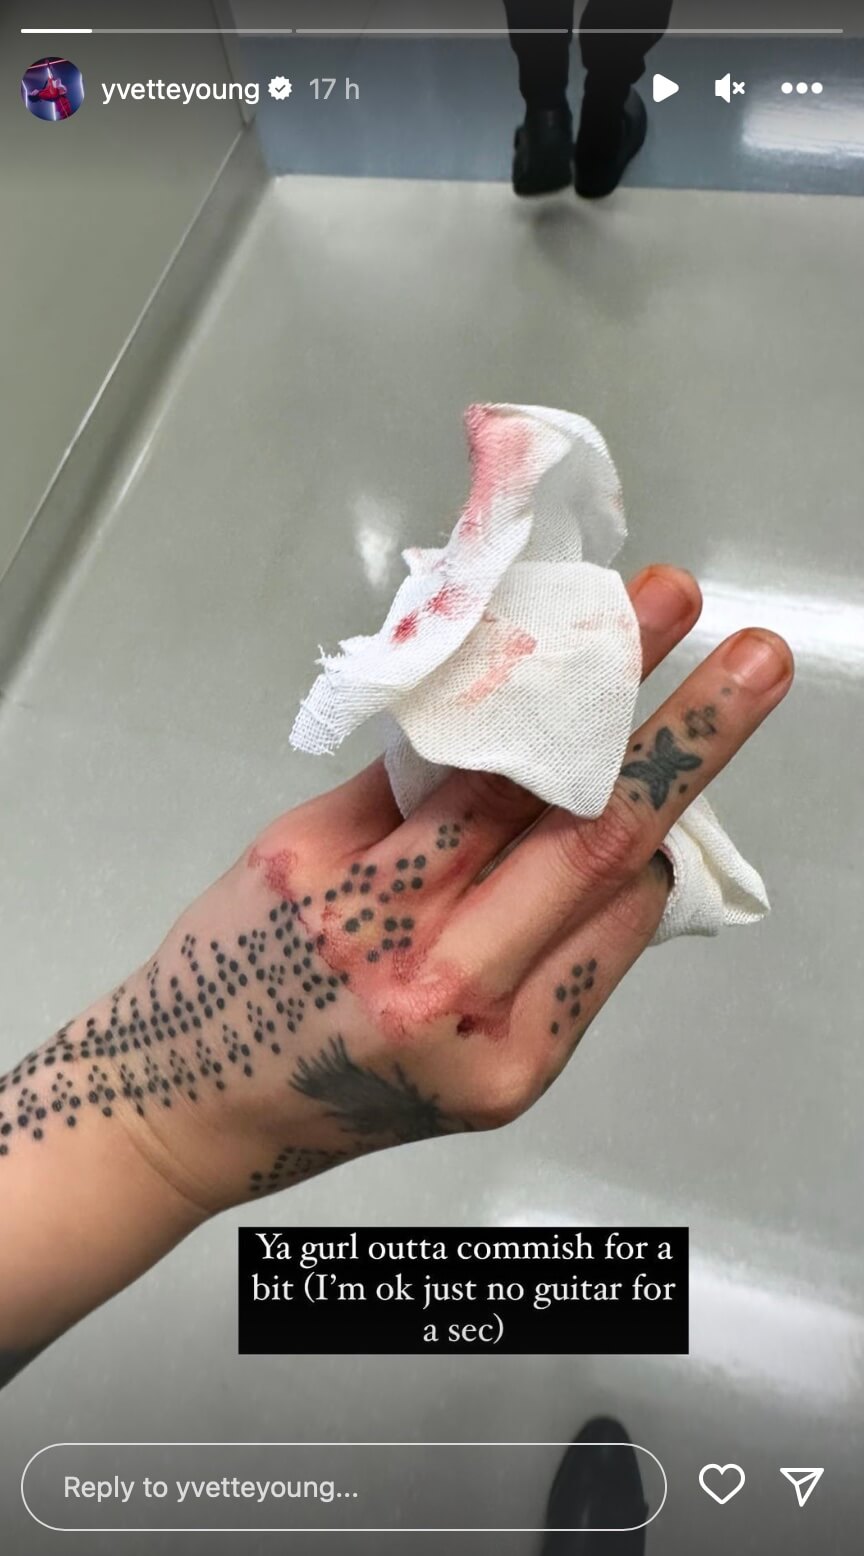 Yvette Young's finger covered in a slightly bloody bandage